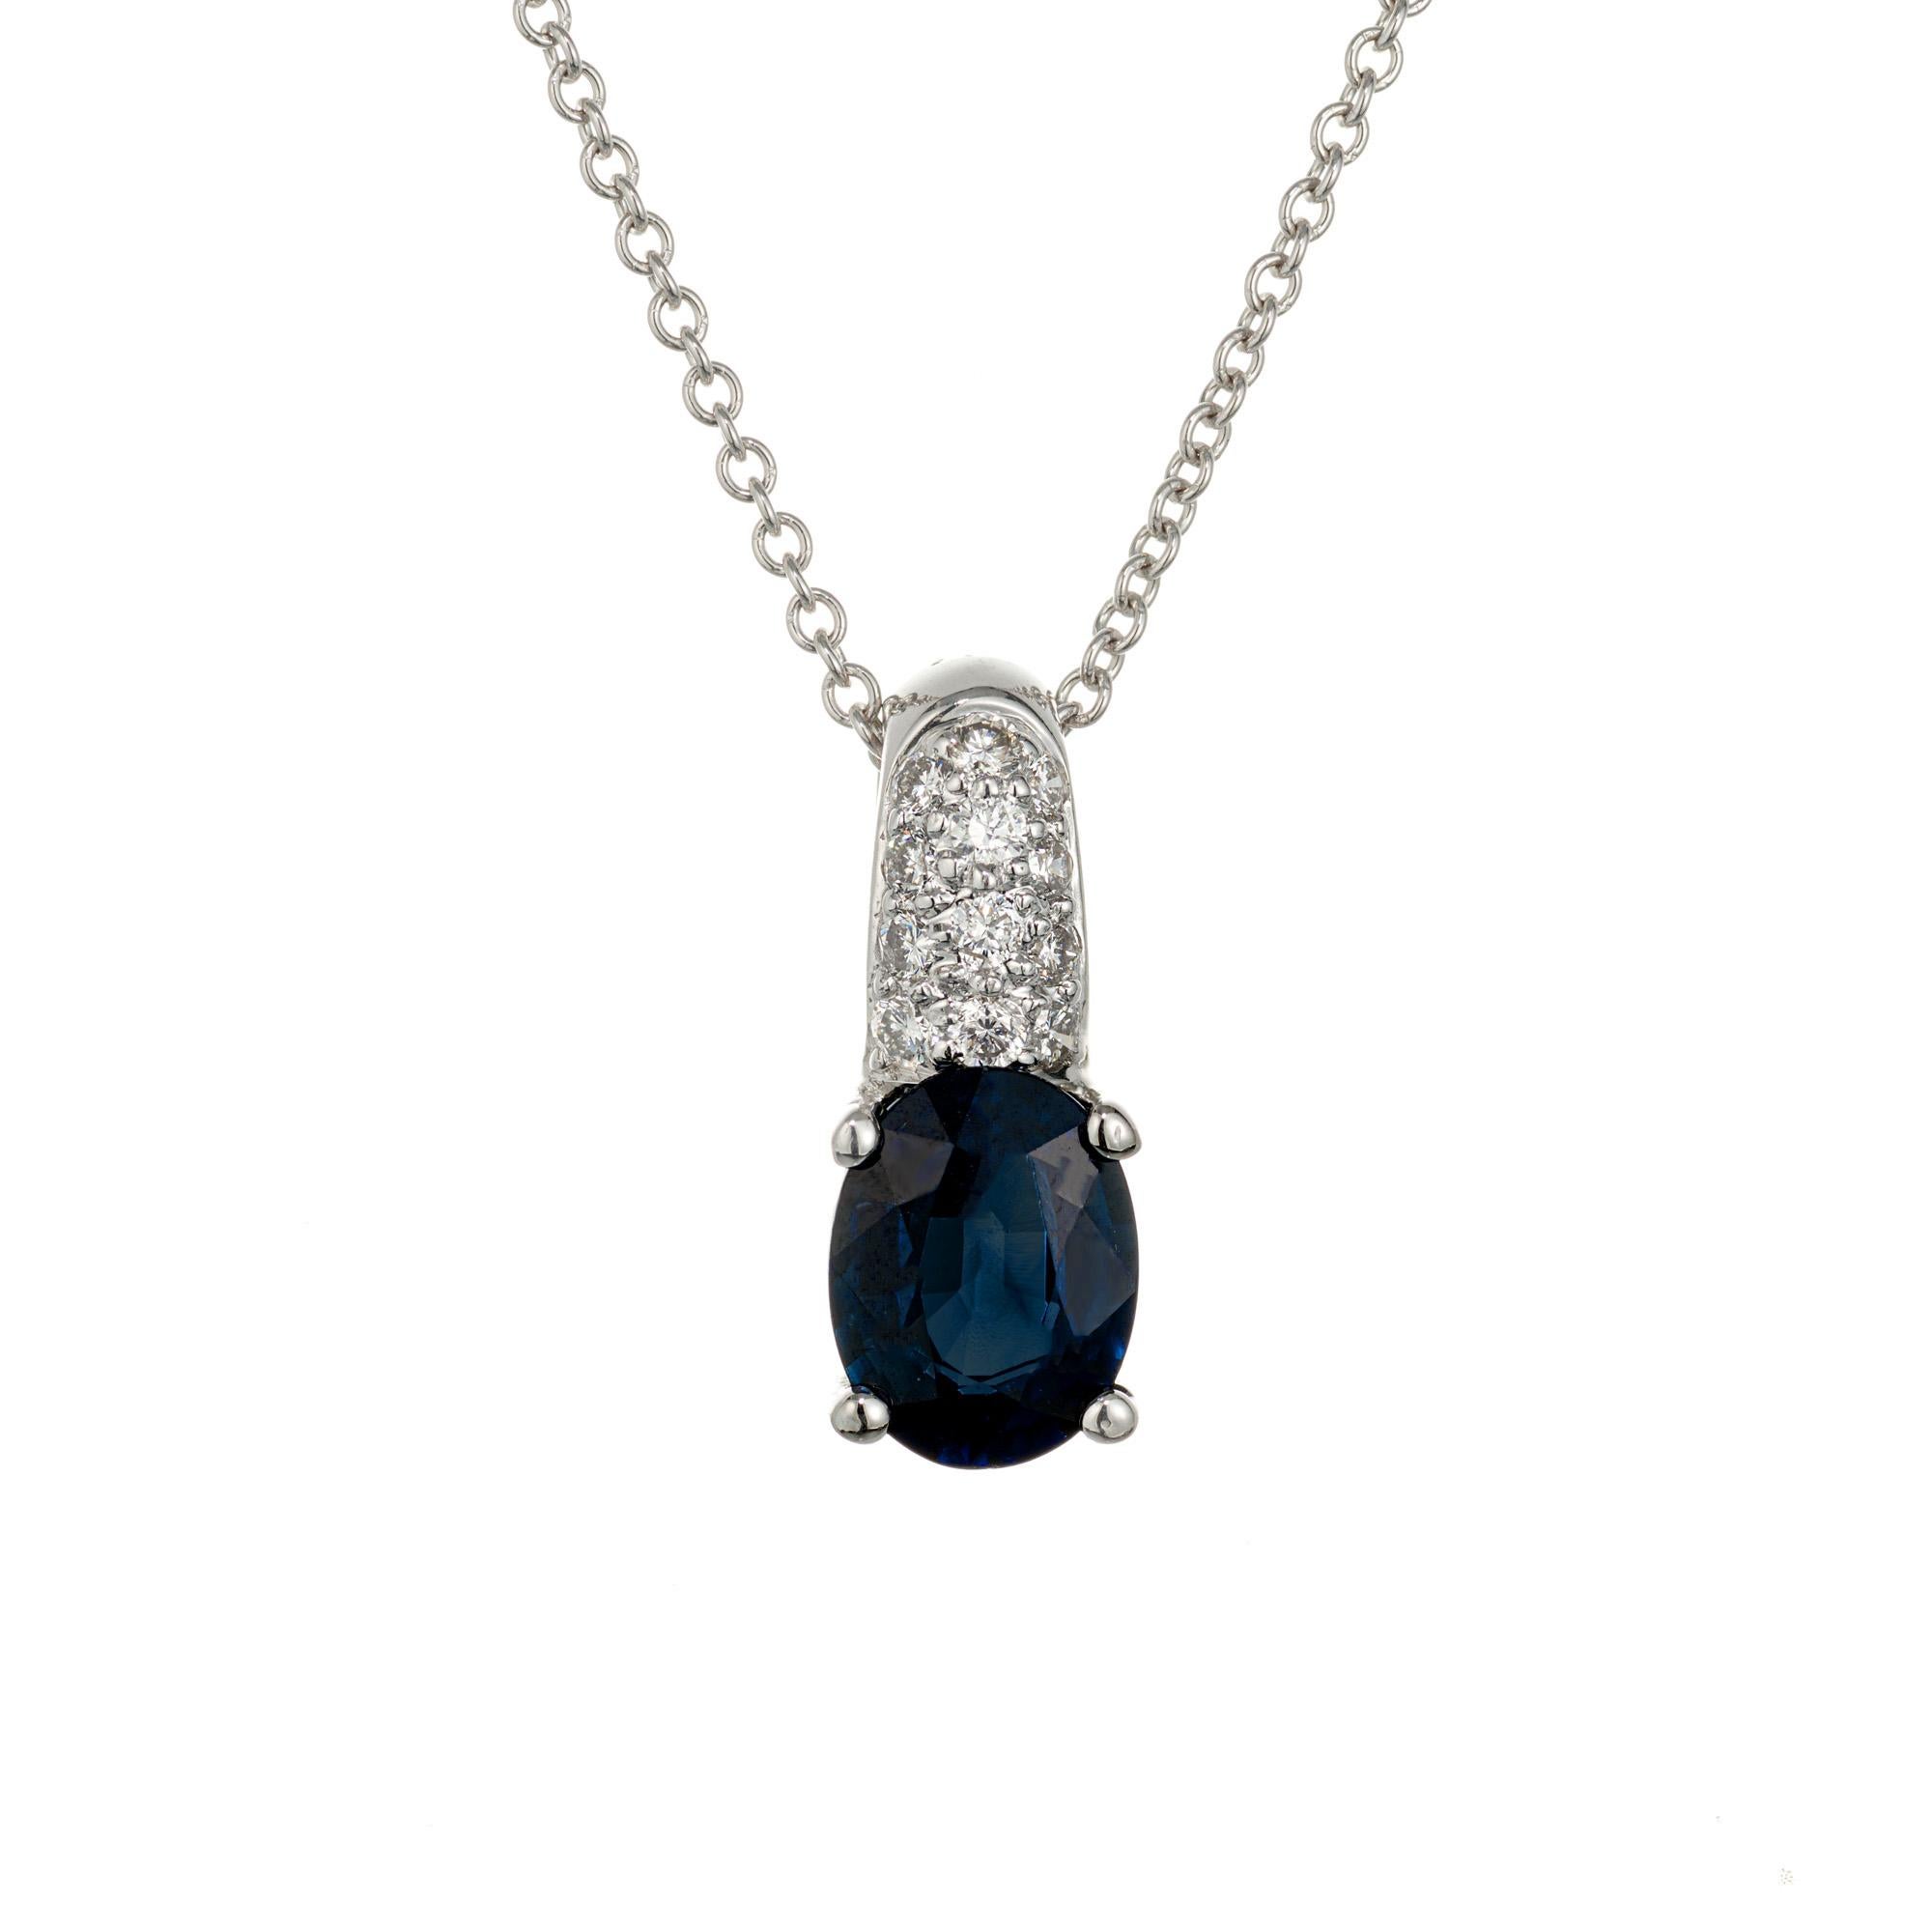 Sapphire and diamond pendant necklace. Natural untreated GIA certified 1.45 carat oval blue sapphire in an 18k white gold pendant with 12 round brilliant cut clustered diamonds on the bail. 18 inch chain. Designed and crafted in the Peter Suchy